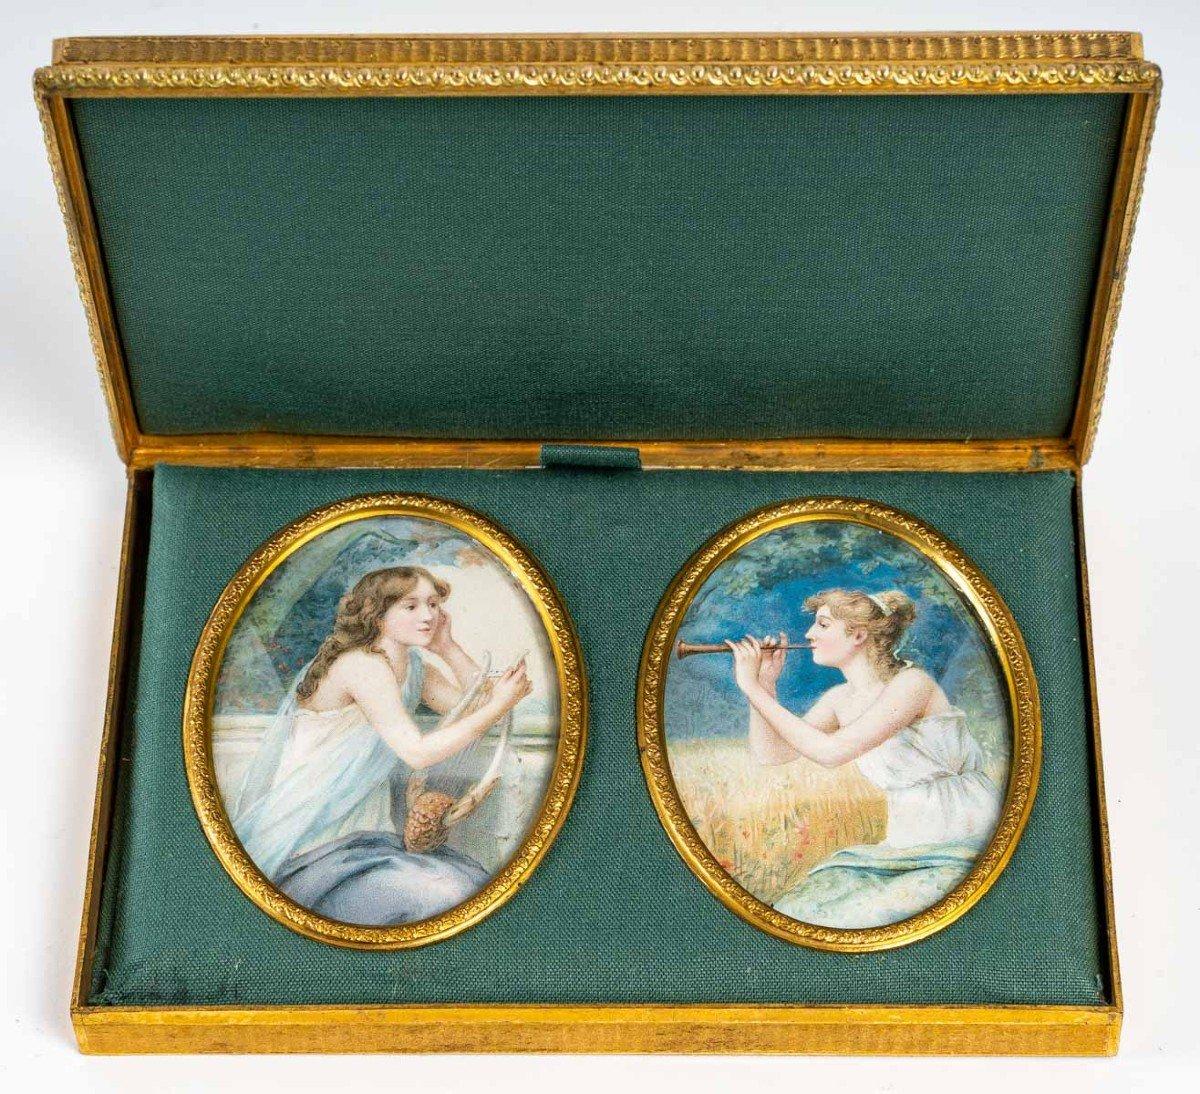 Jewellery box with miniatures, end of XIXth Century
Jewellery box with two miniature paintings of portraits, end of XIXth century.
In perfect condition
H : 14 cm / H firm : 2,5 cm / W : 15 cm / D : 11,5 cm
Miniature : H : 8,5 cm / W 6 cm
ref 3032